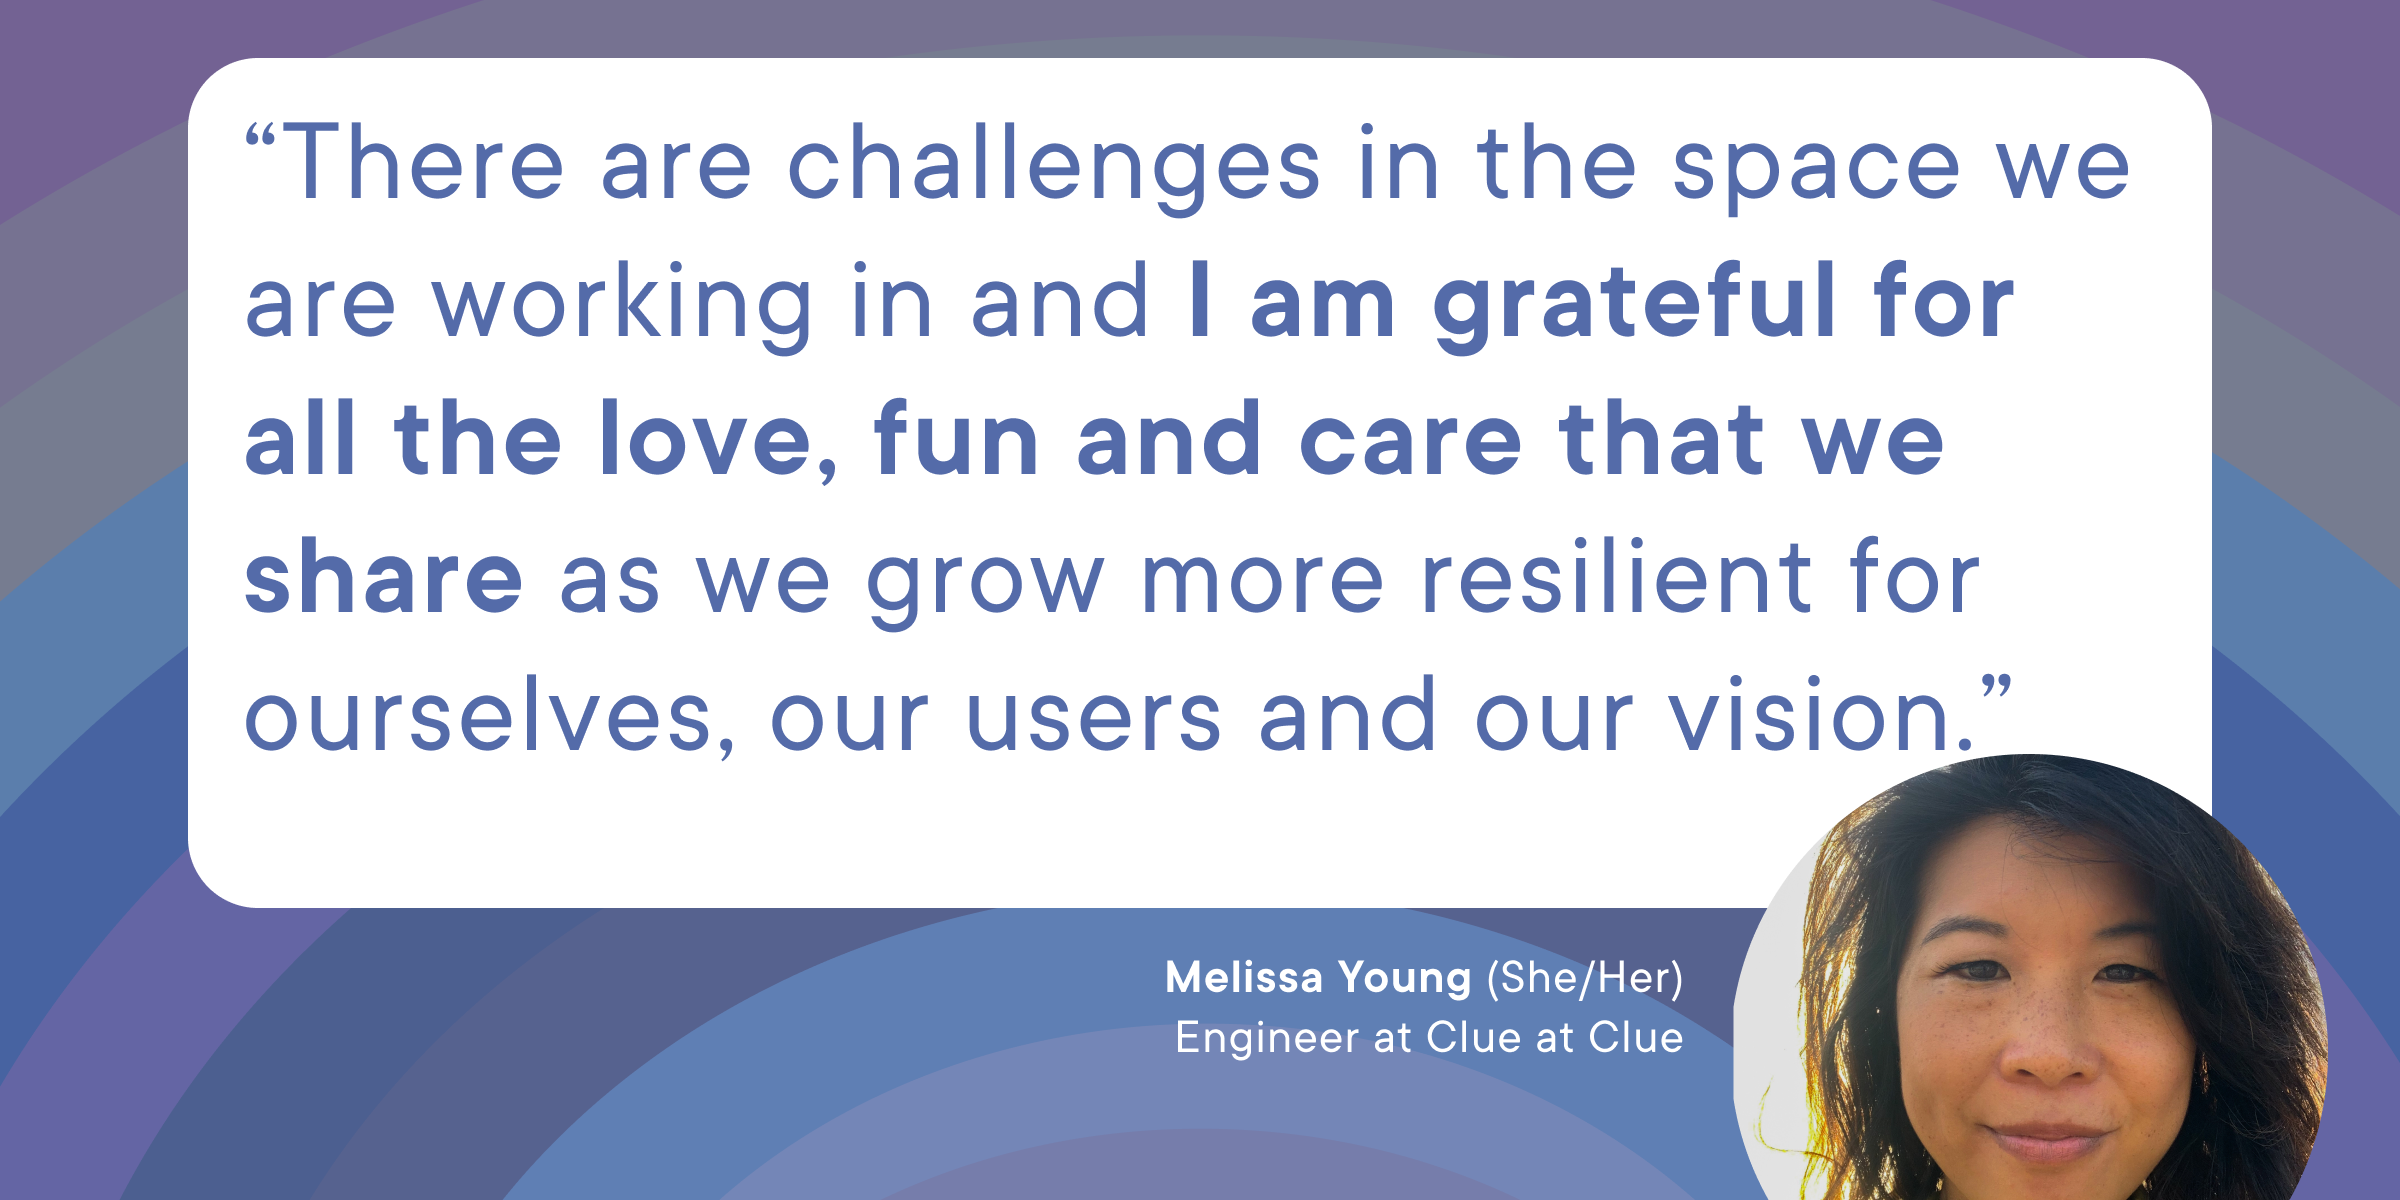 This is a quote from Clue employee Melissa that reads: "There are challenges in the space we are working in and I am grateful for all the love, fun and care that we share as we grow more resilient for ourselves, our users and our vision."